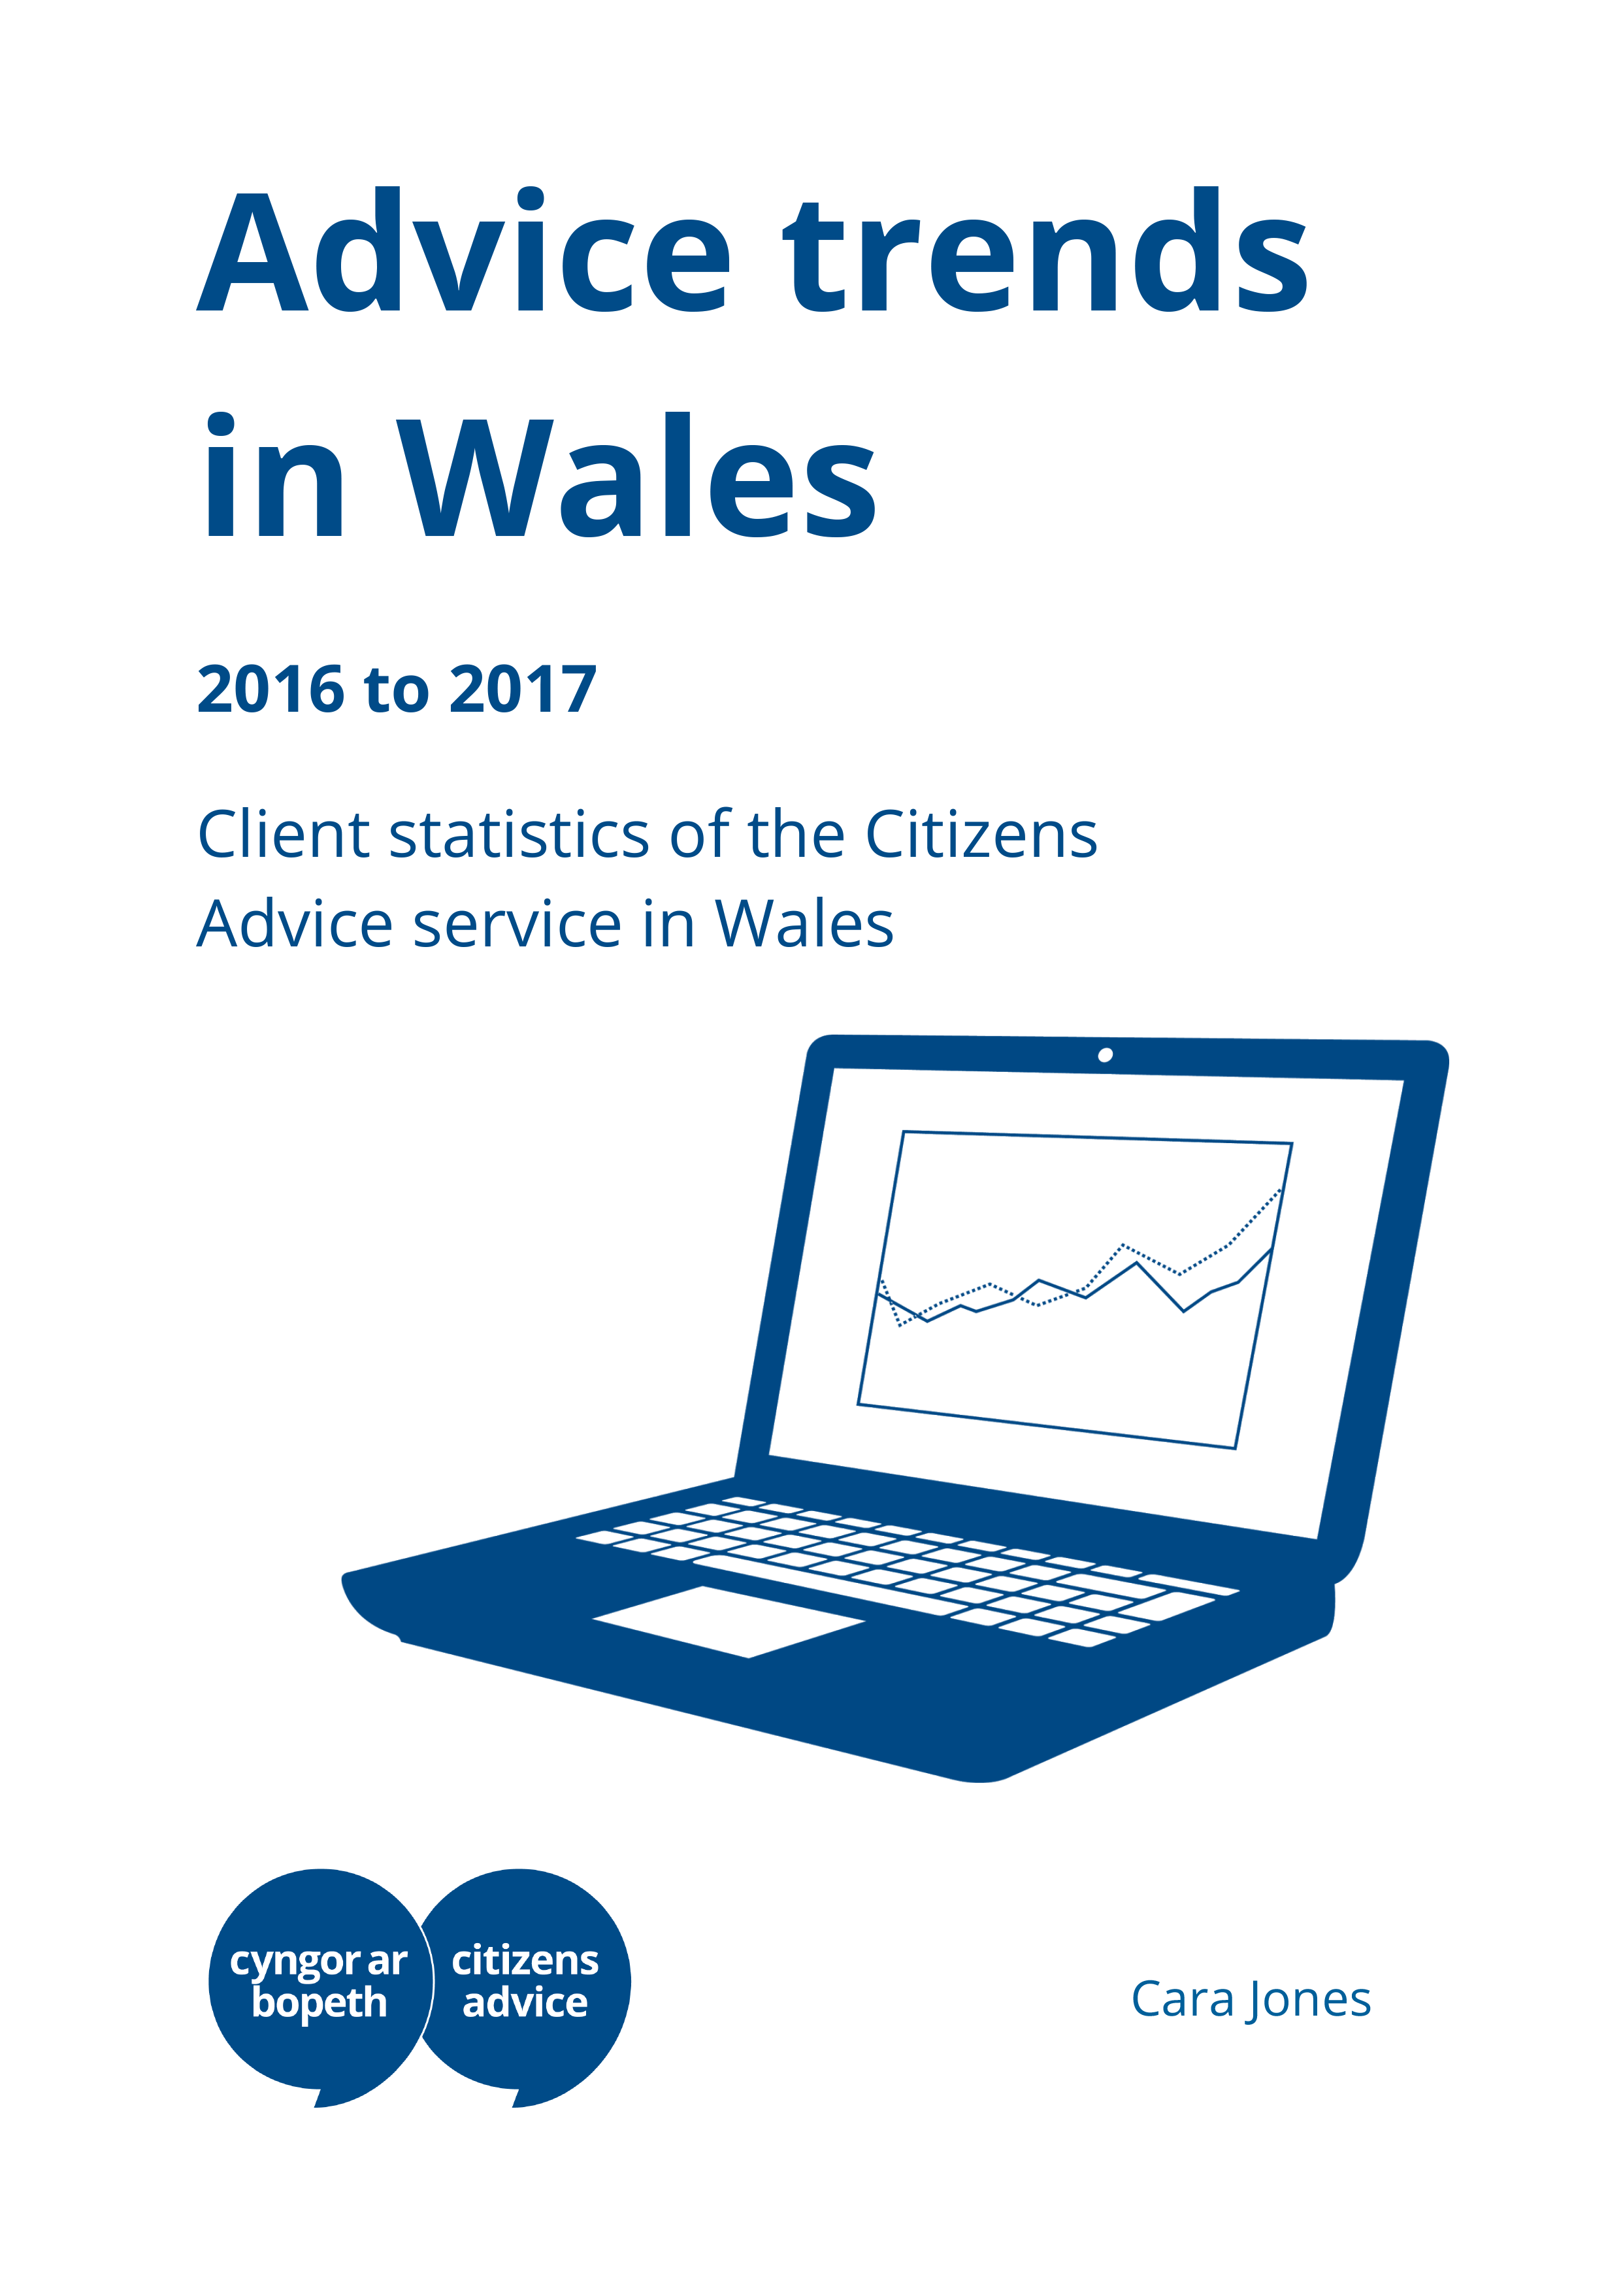 Advice Trends in Wales 2016 to 2017